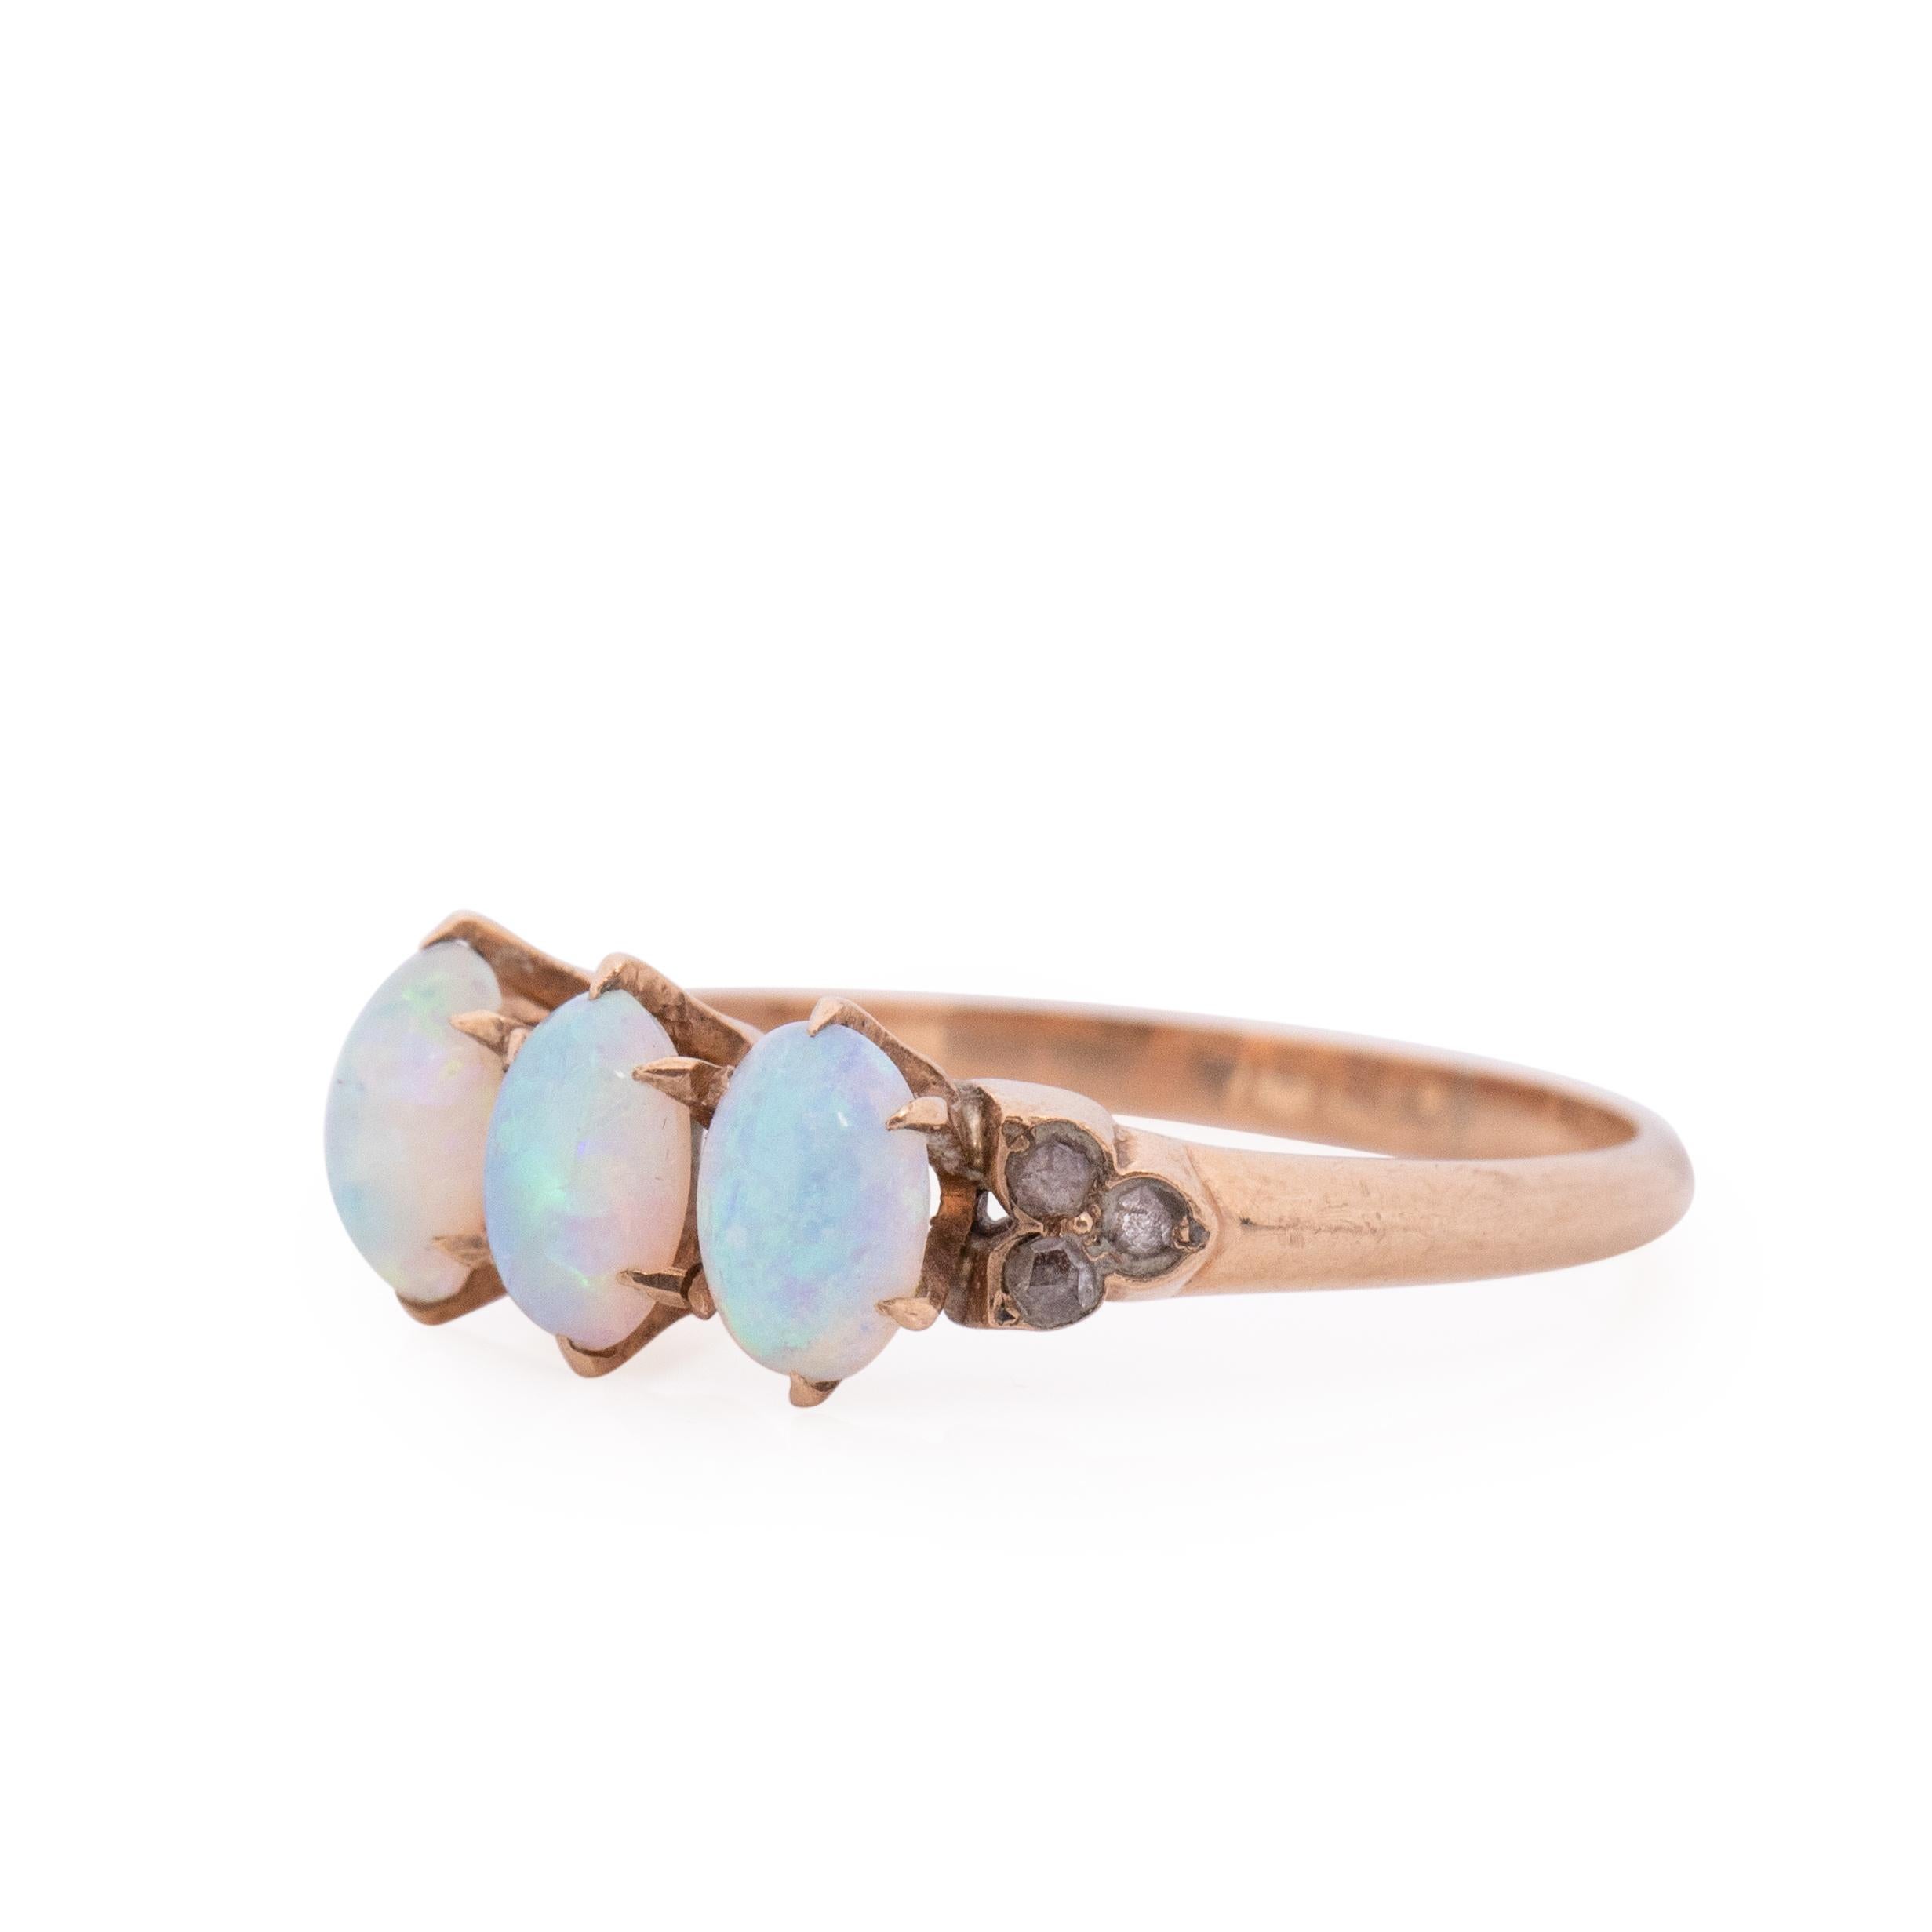 This ring is truly breath taking, every detail adds works in perfect harmony. This three stone ring is crafted in 10K rose gold, on either side of the three opals are diamonds in a tris shape. Giving it a floral feel. The three opals have